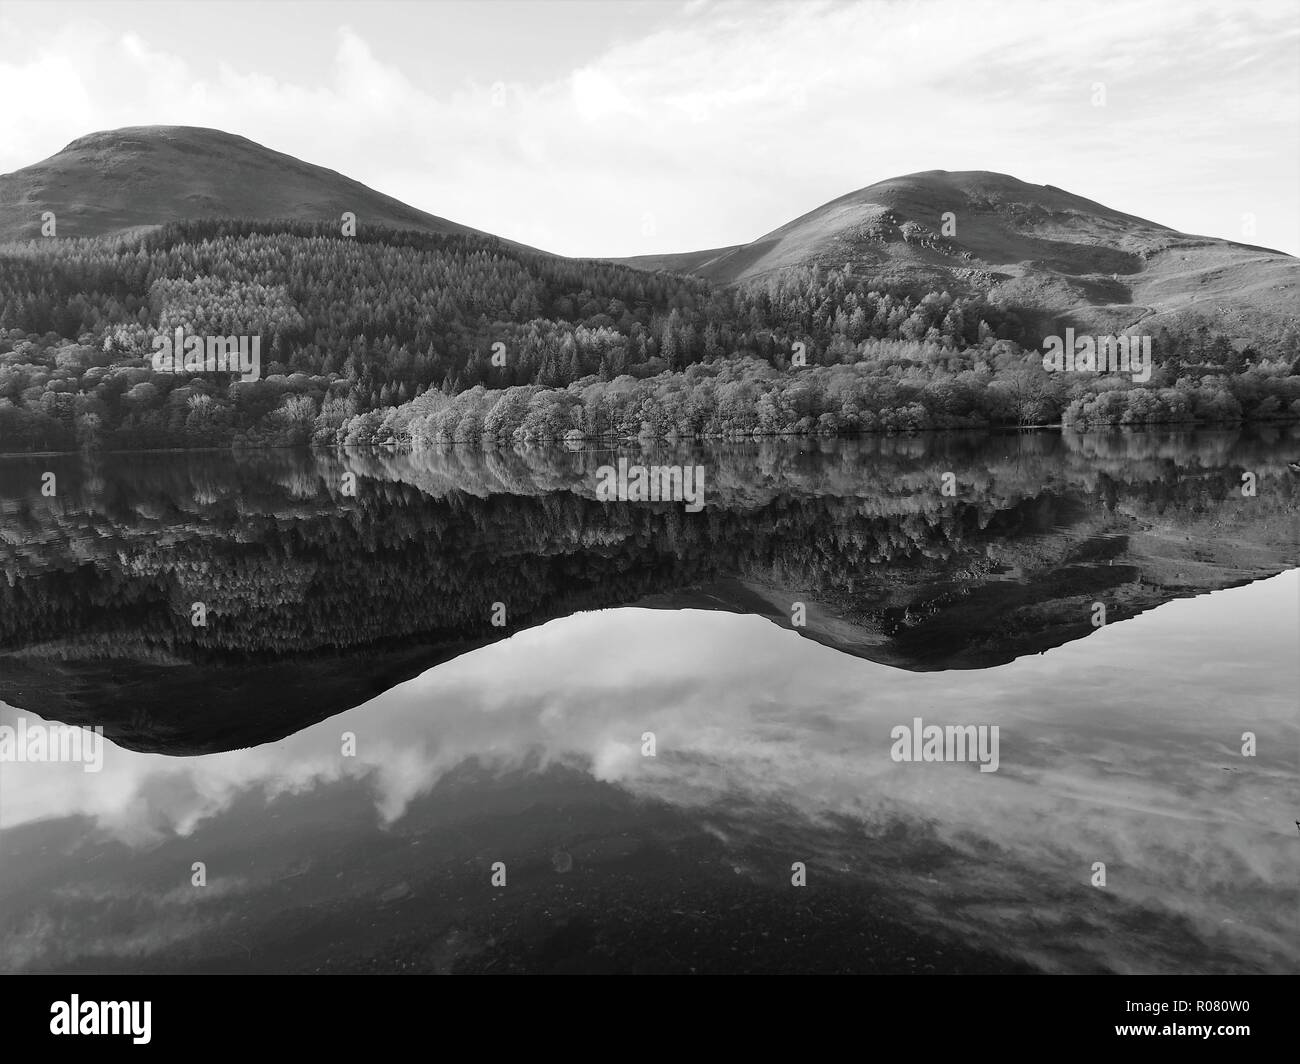 Holme Wood and hills above reflected in the still Loweswater, Lake District National Park, Cumbria, England, United Kingdom Stock Photo